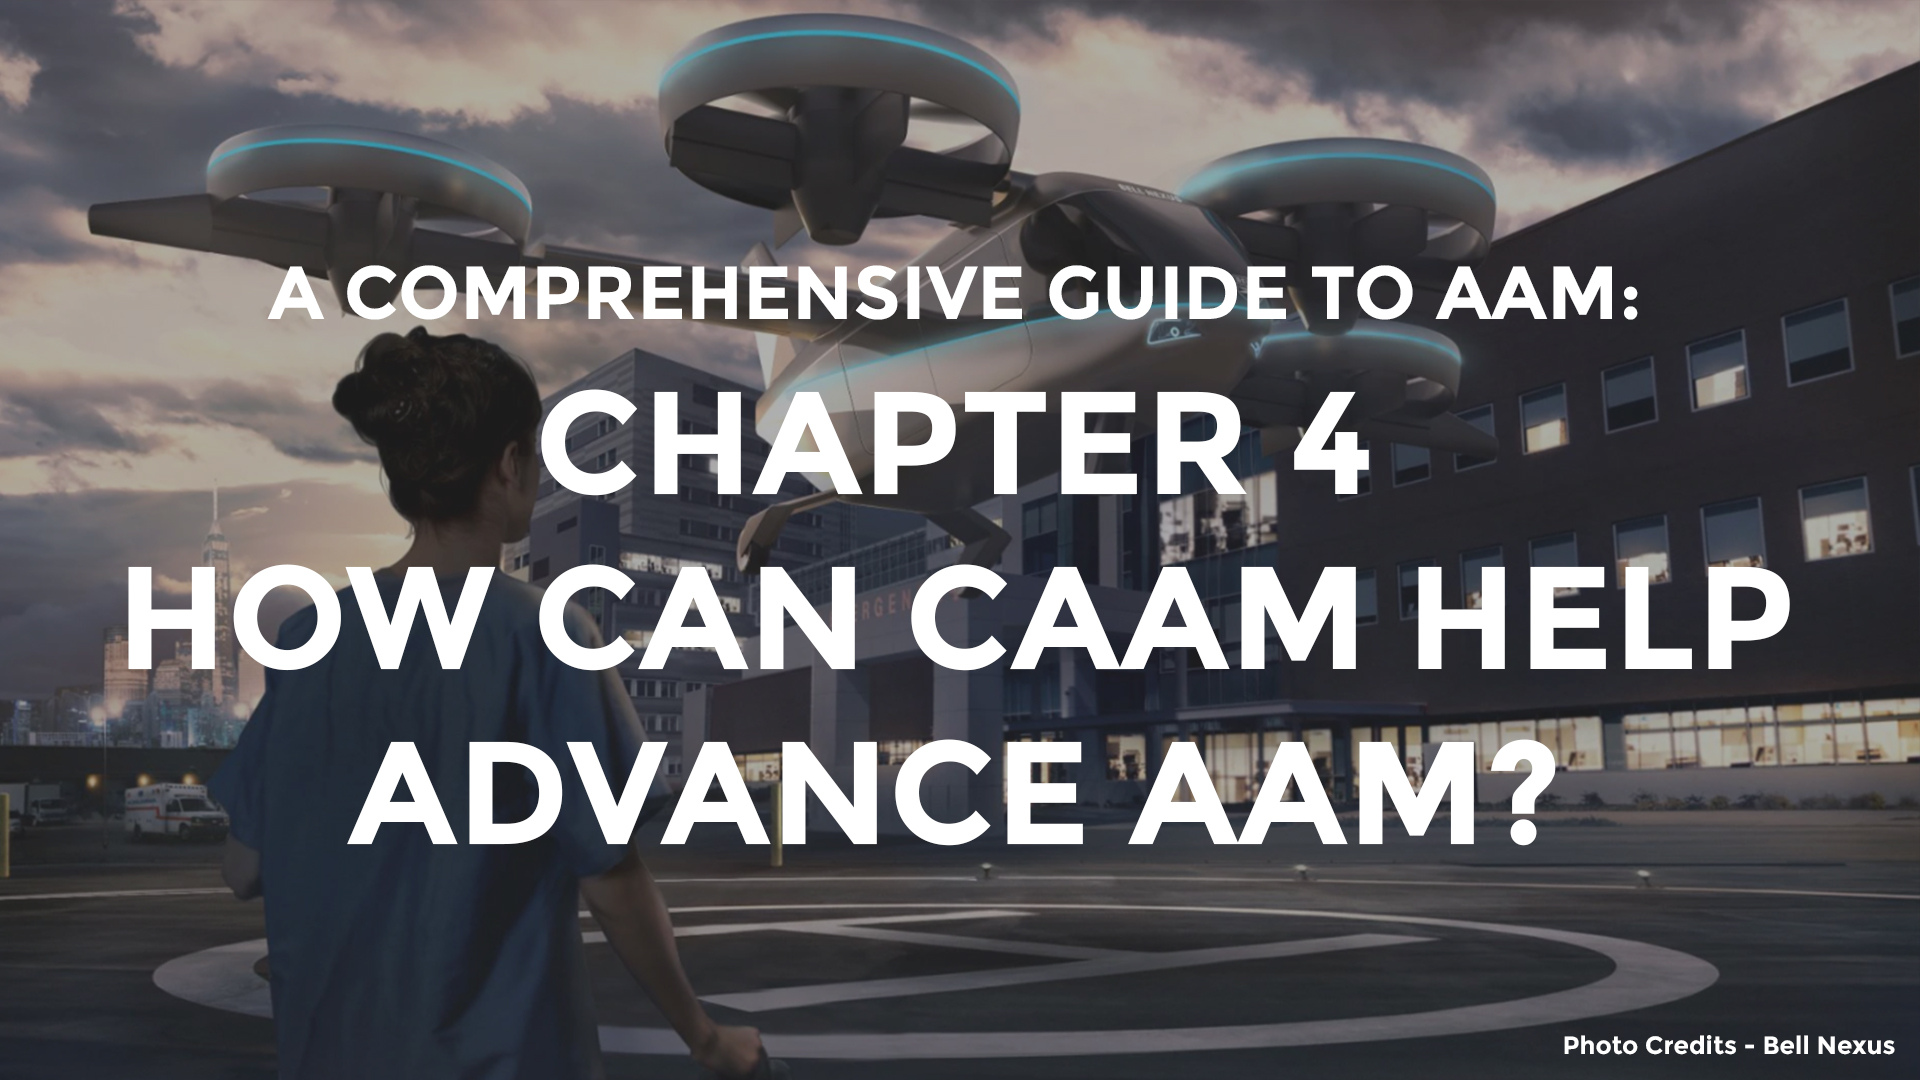 How can CAAM help advance AAM?